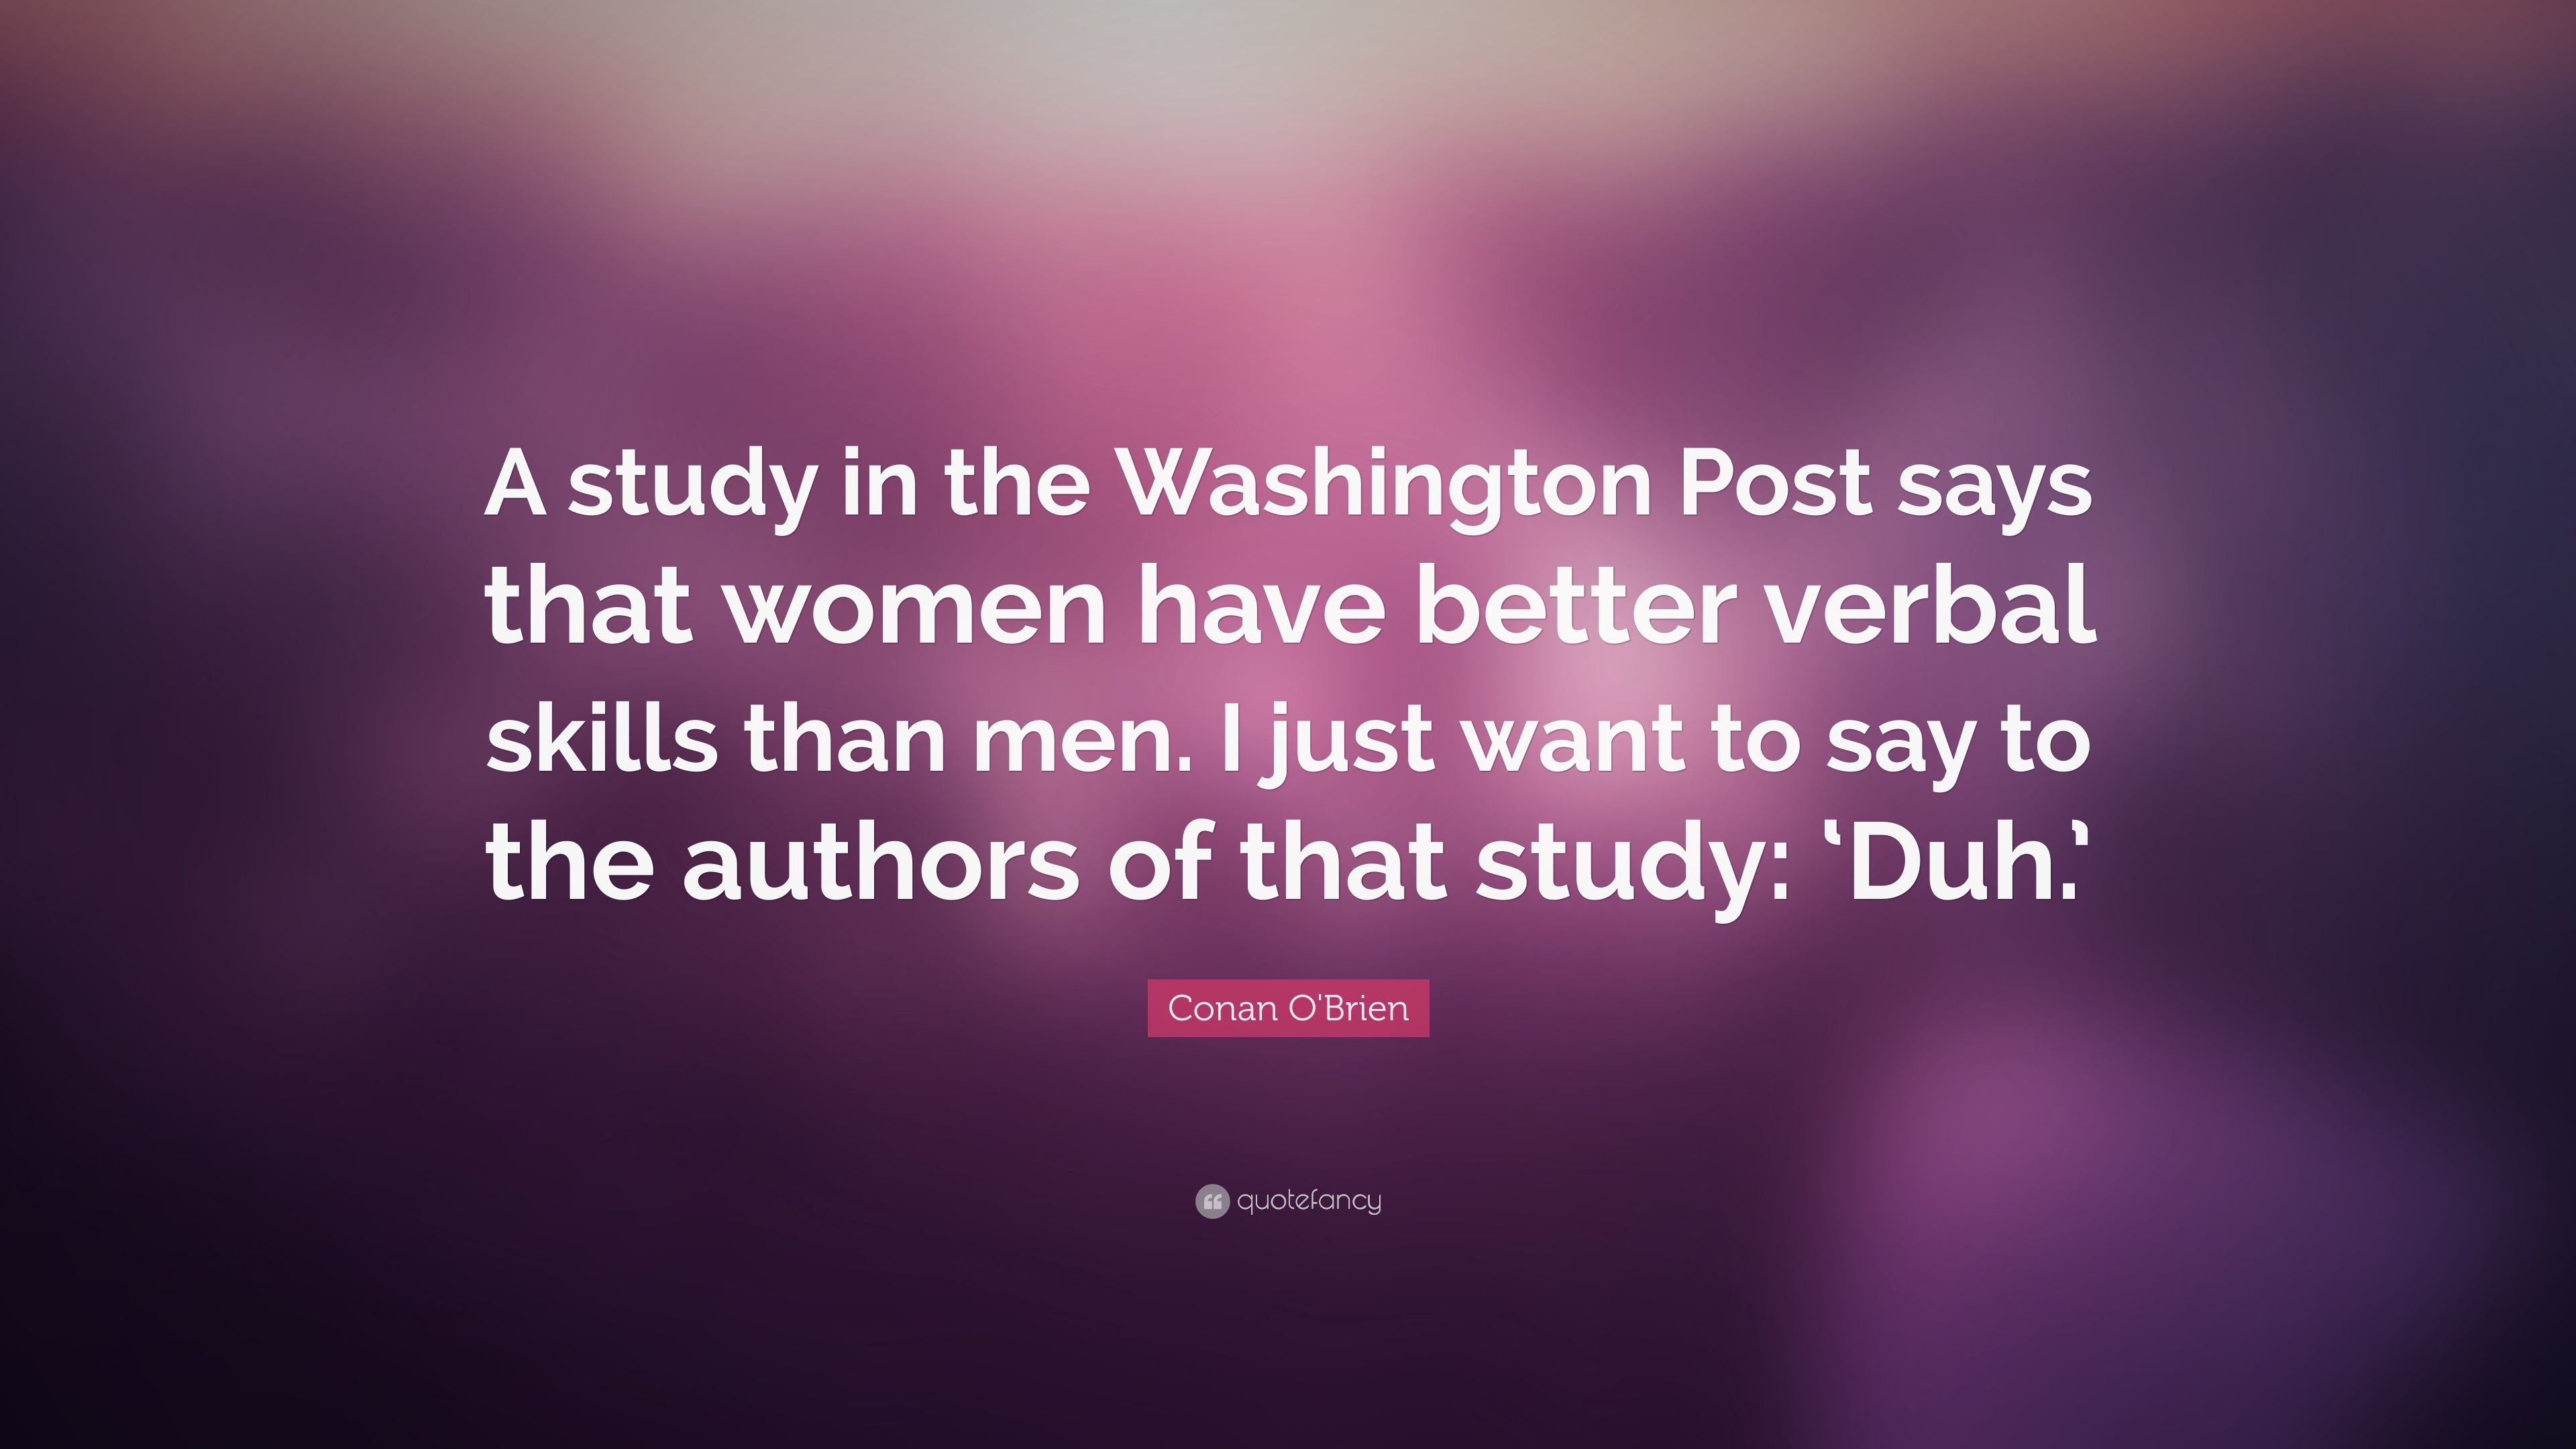 Conan O'Brien Quote: “A study in the Washington Post says that women have better verbal skills than men. I just want to say to the authors” (6 wallpaper)